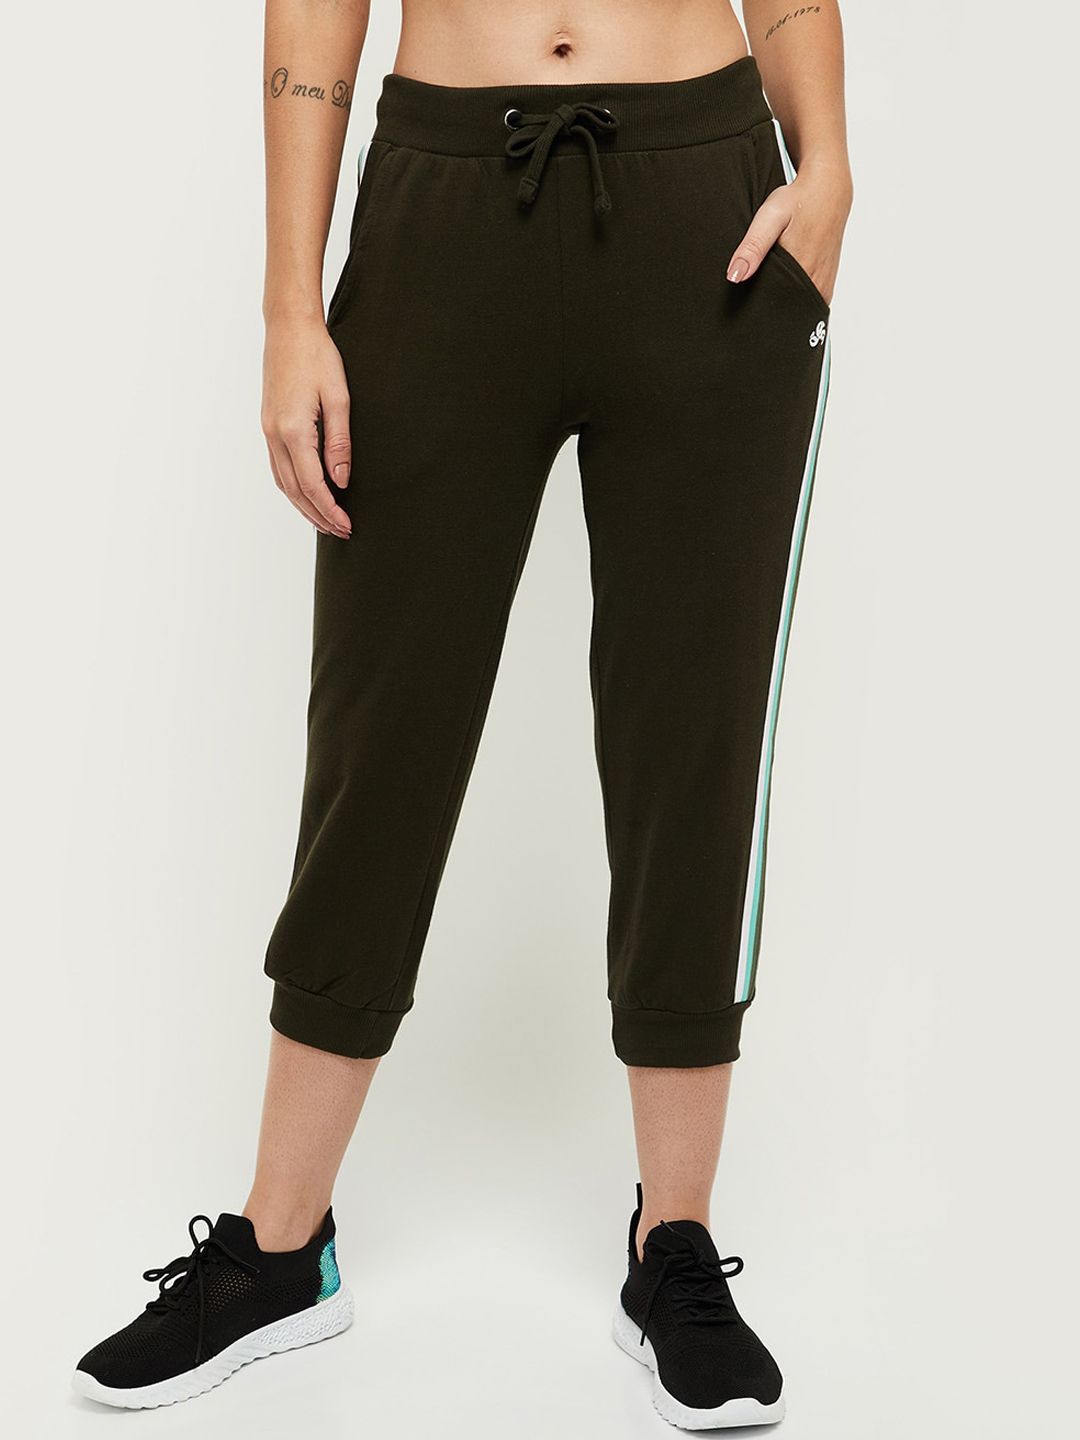 max Women Green Solid Track Pants Price in India